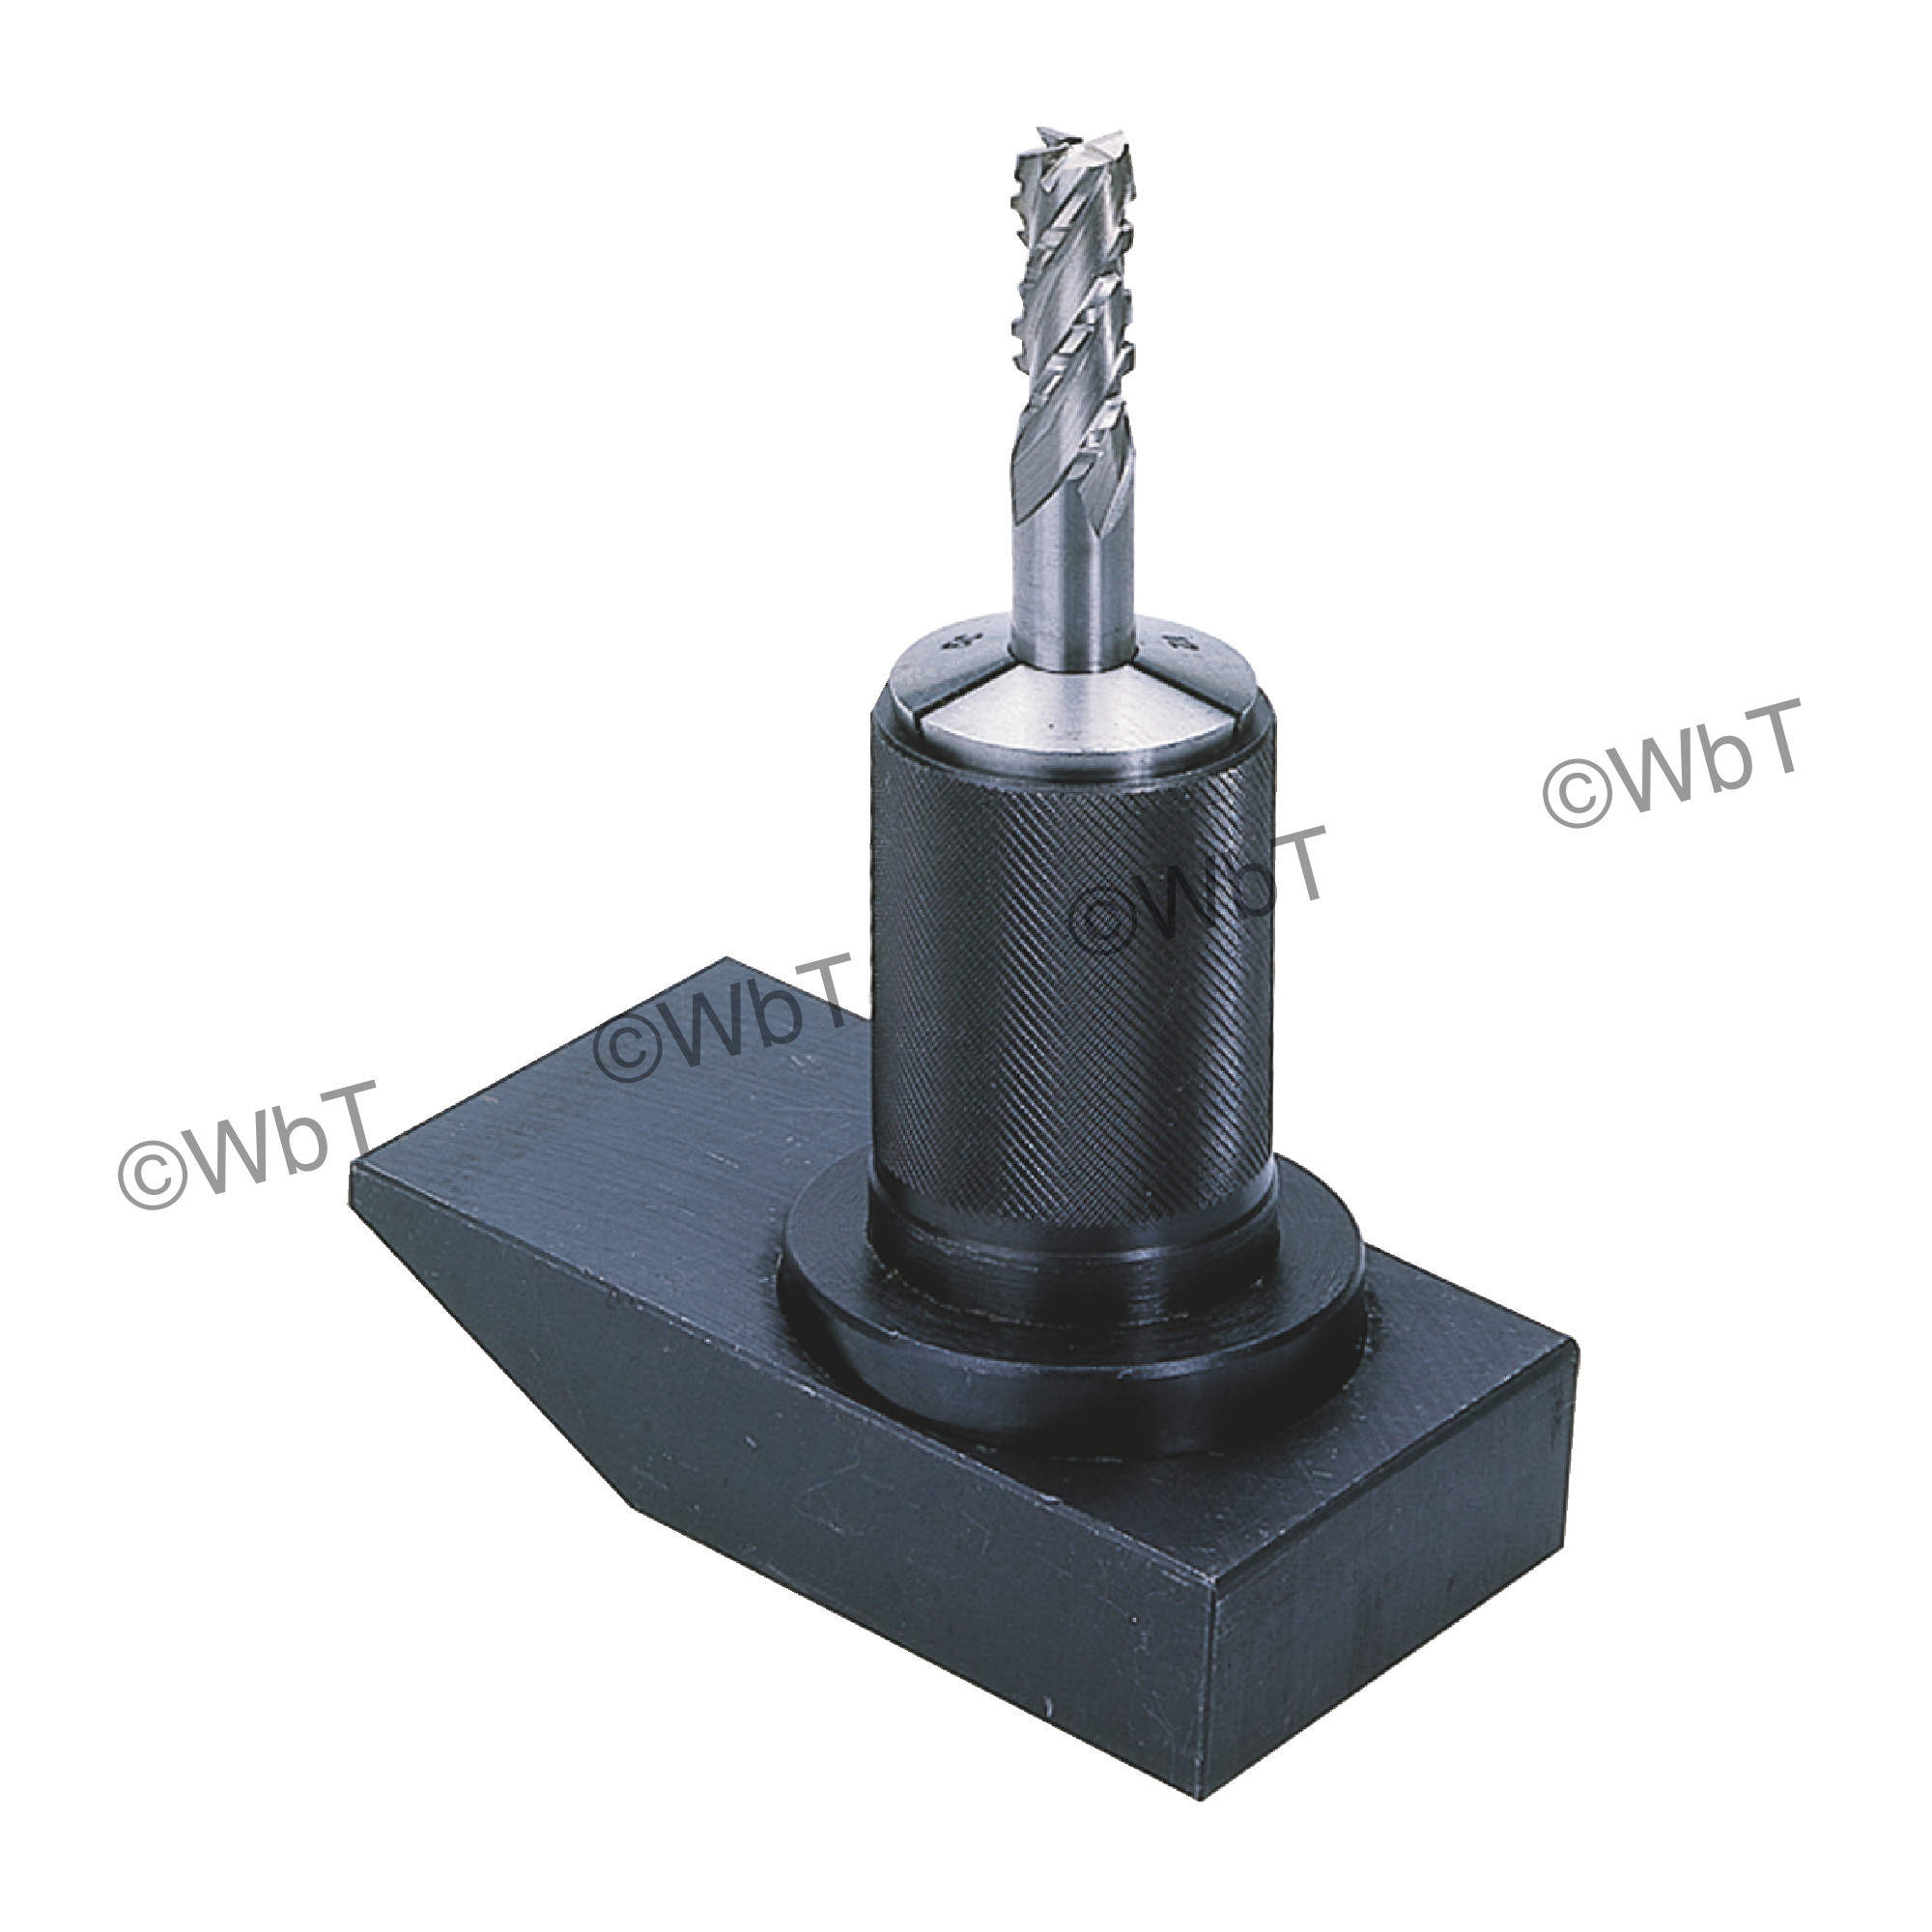 End Mill Grinding Fixture